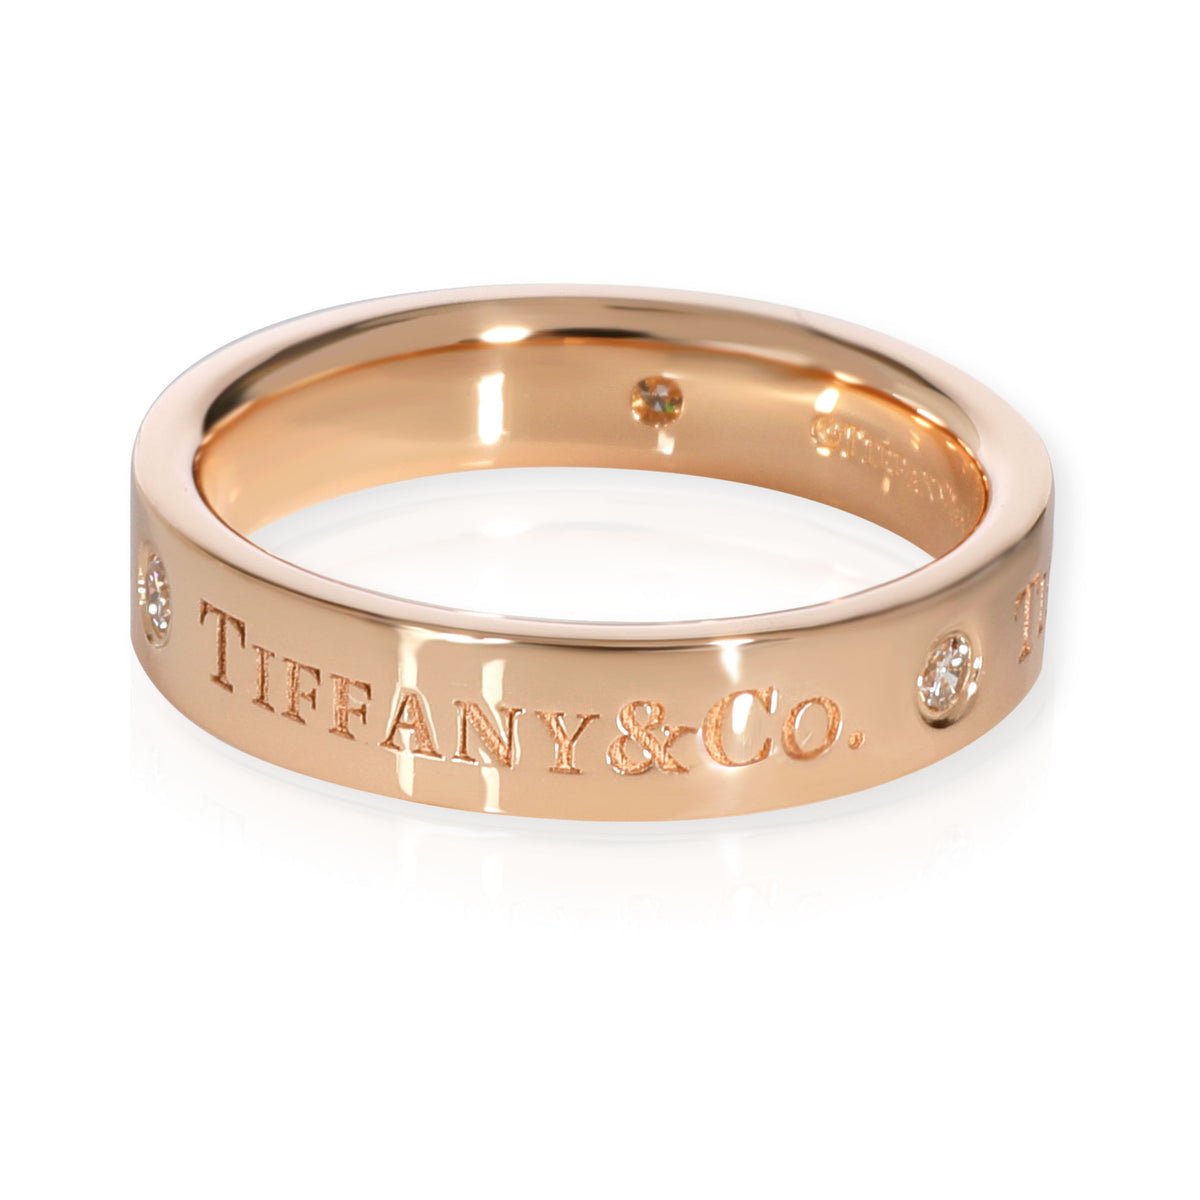 Tiffany & Co. Band Ring with Diamonds in 18K Rose Gold 0.07 CTW